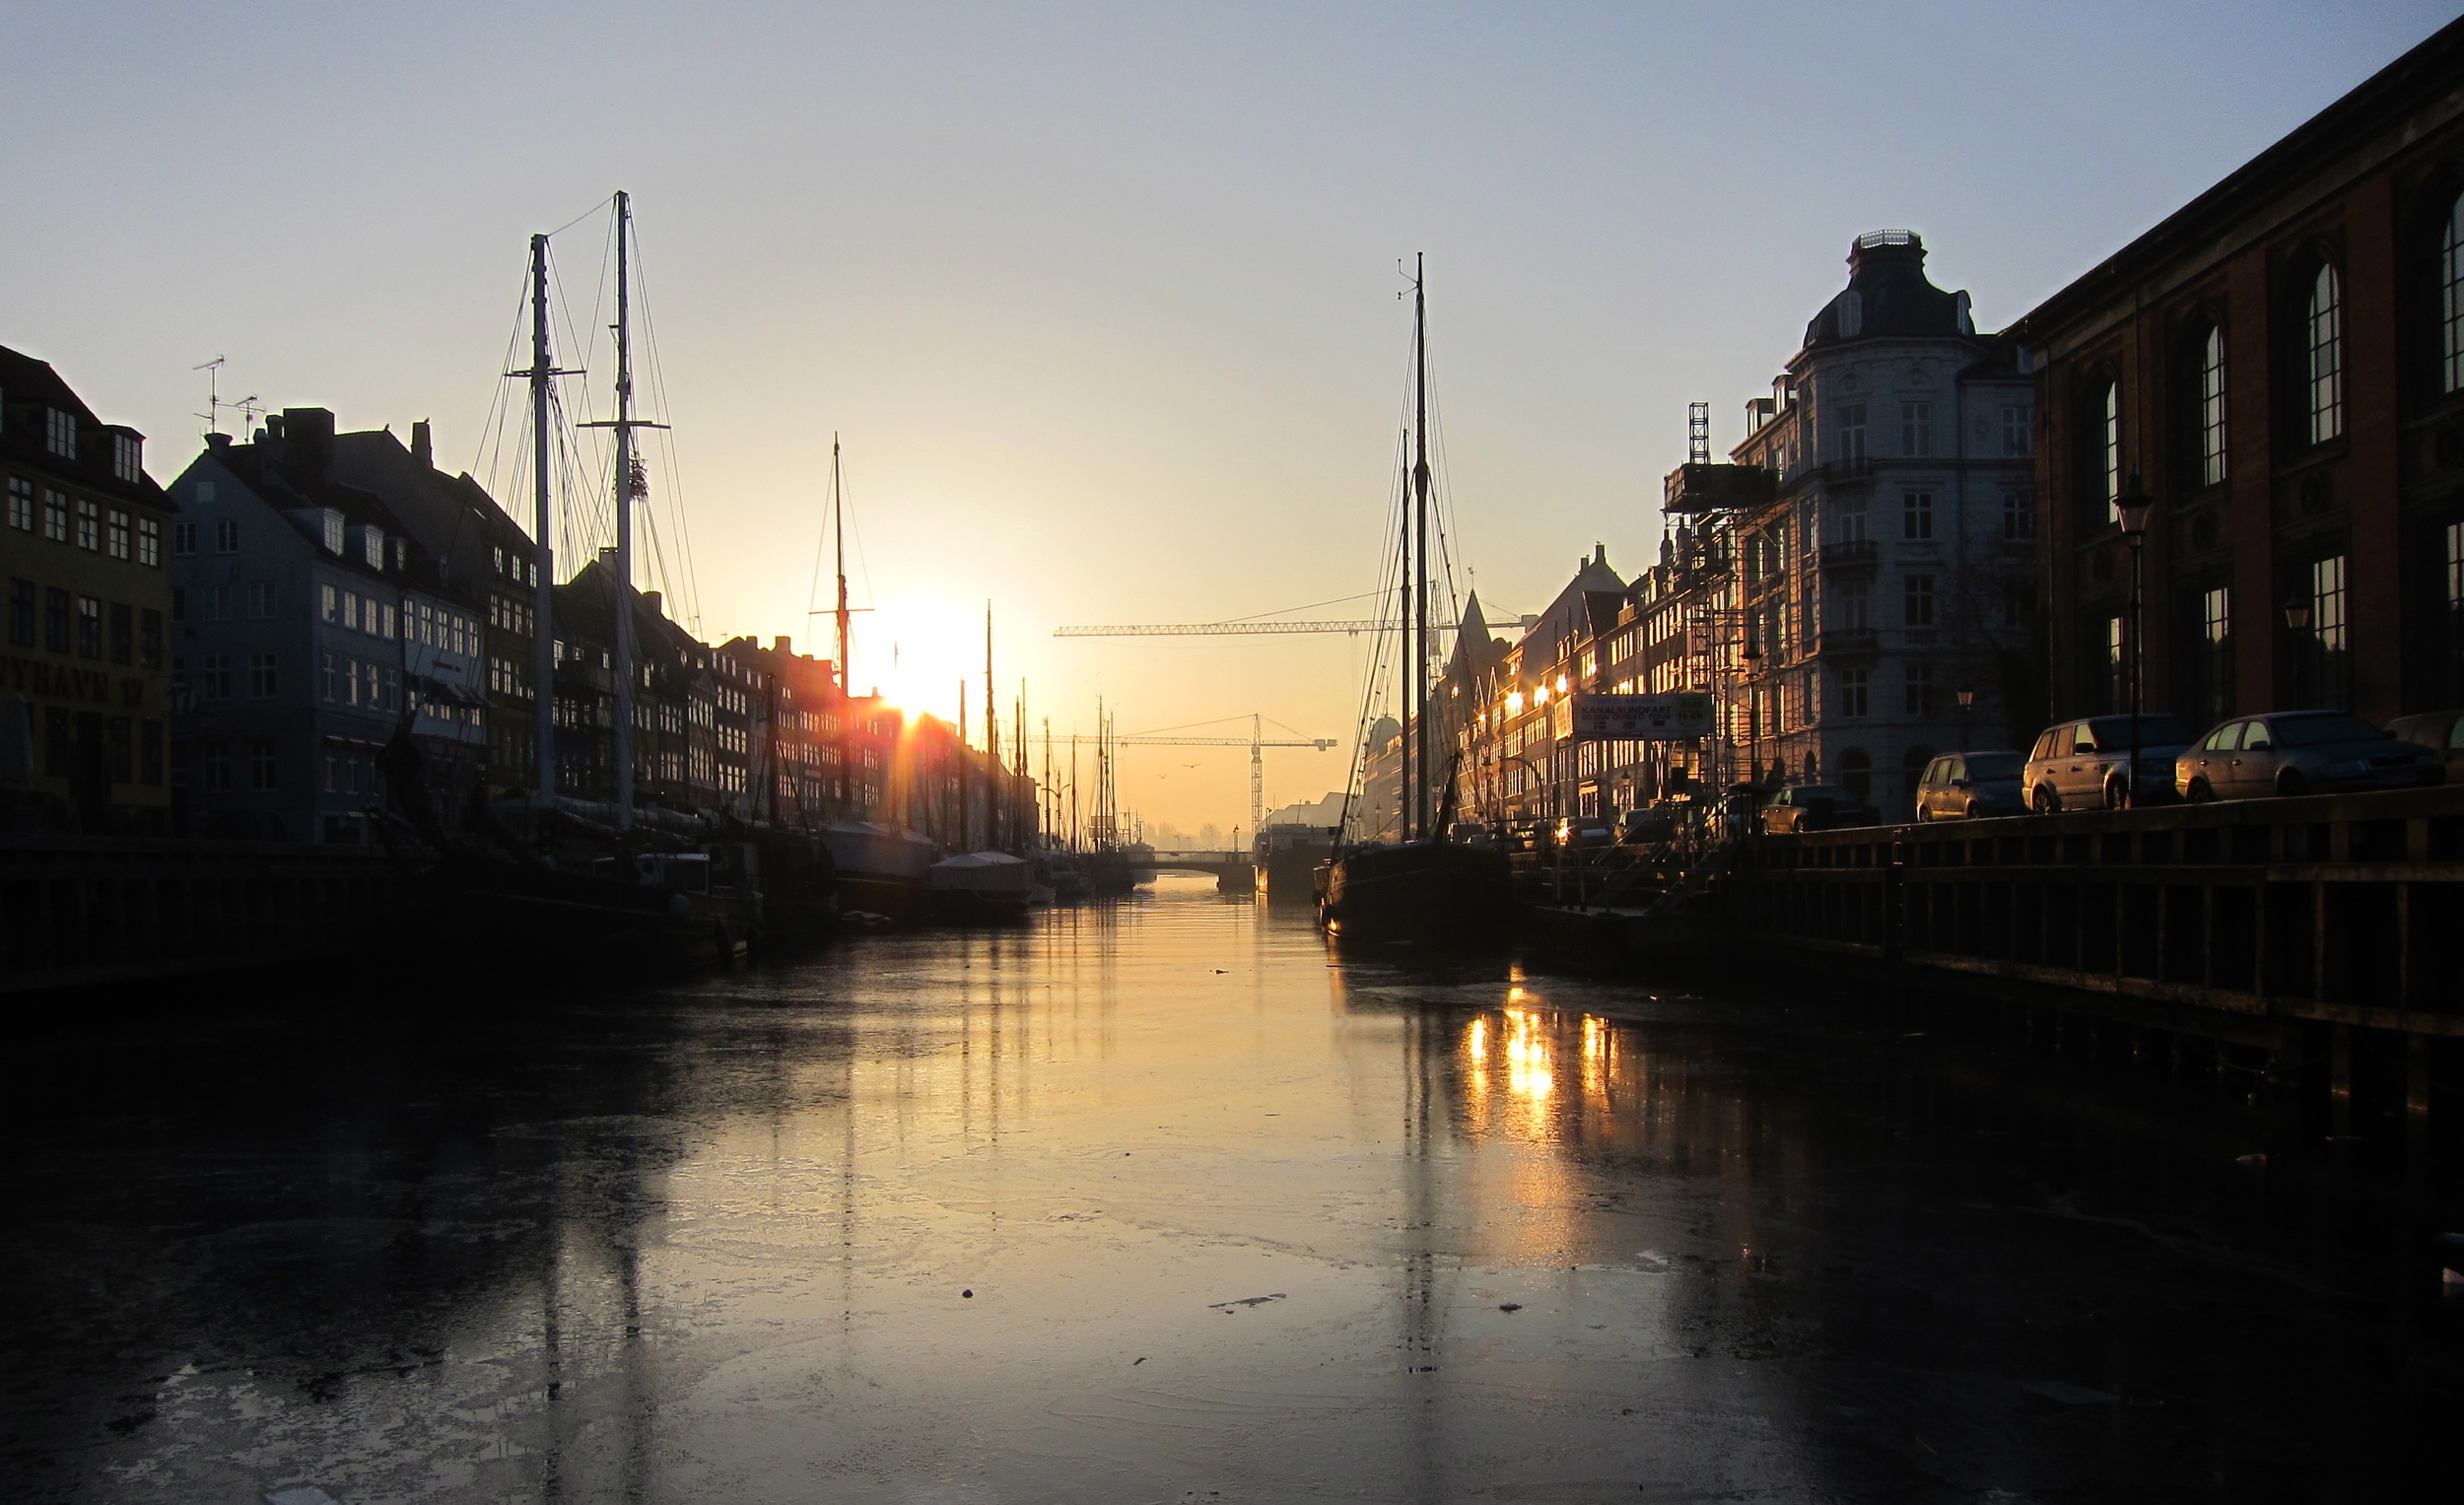 Nyhavn this morning